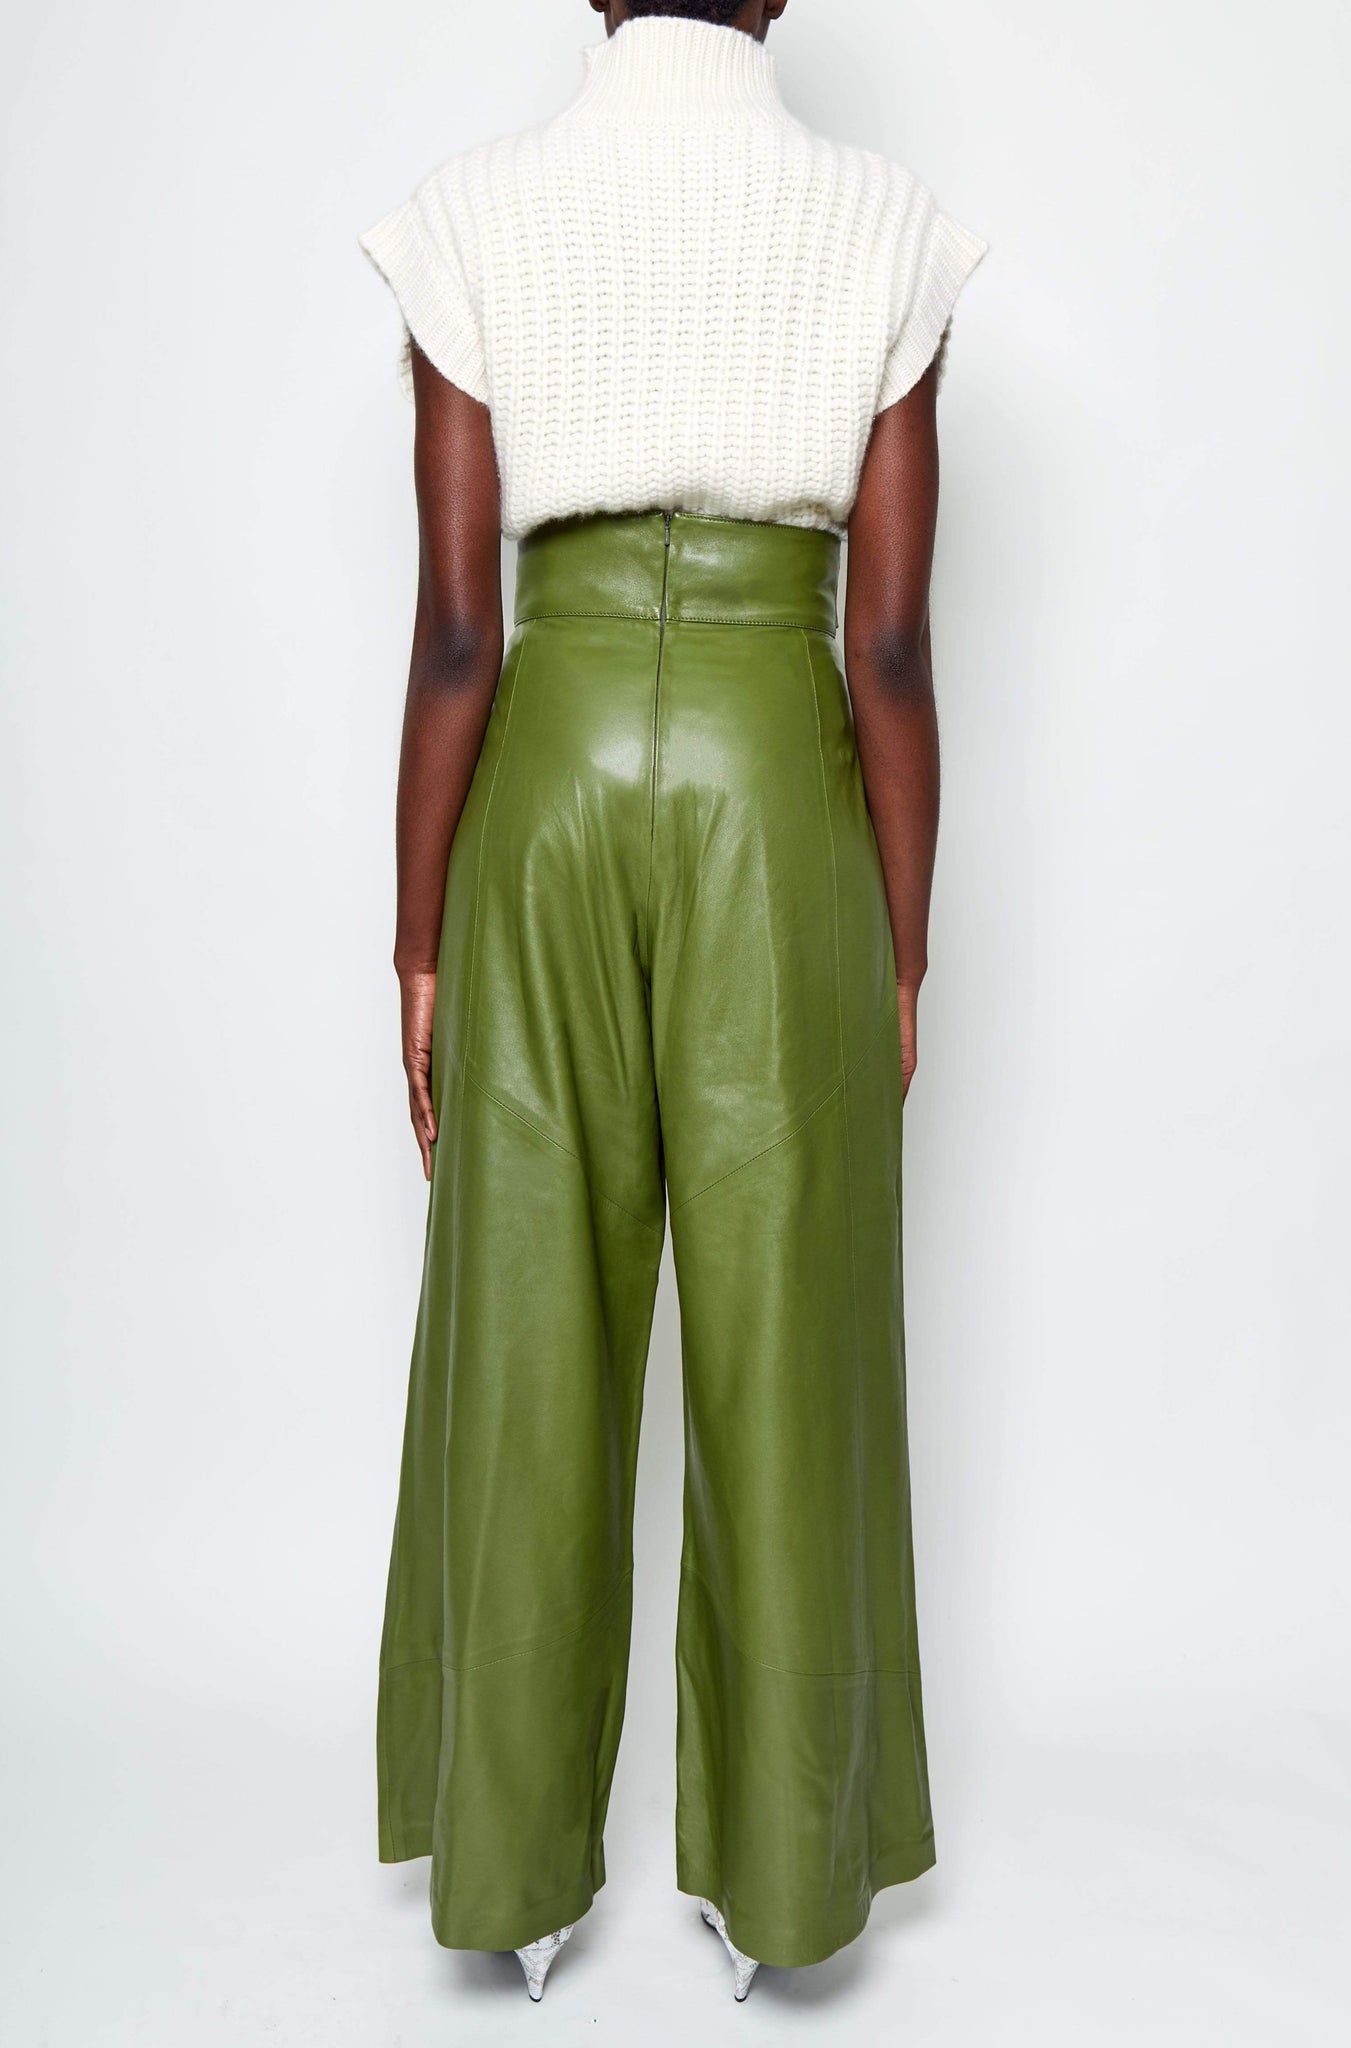 Johnny WIDE LEG LEATHER TROUSER - MOSS